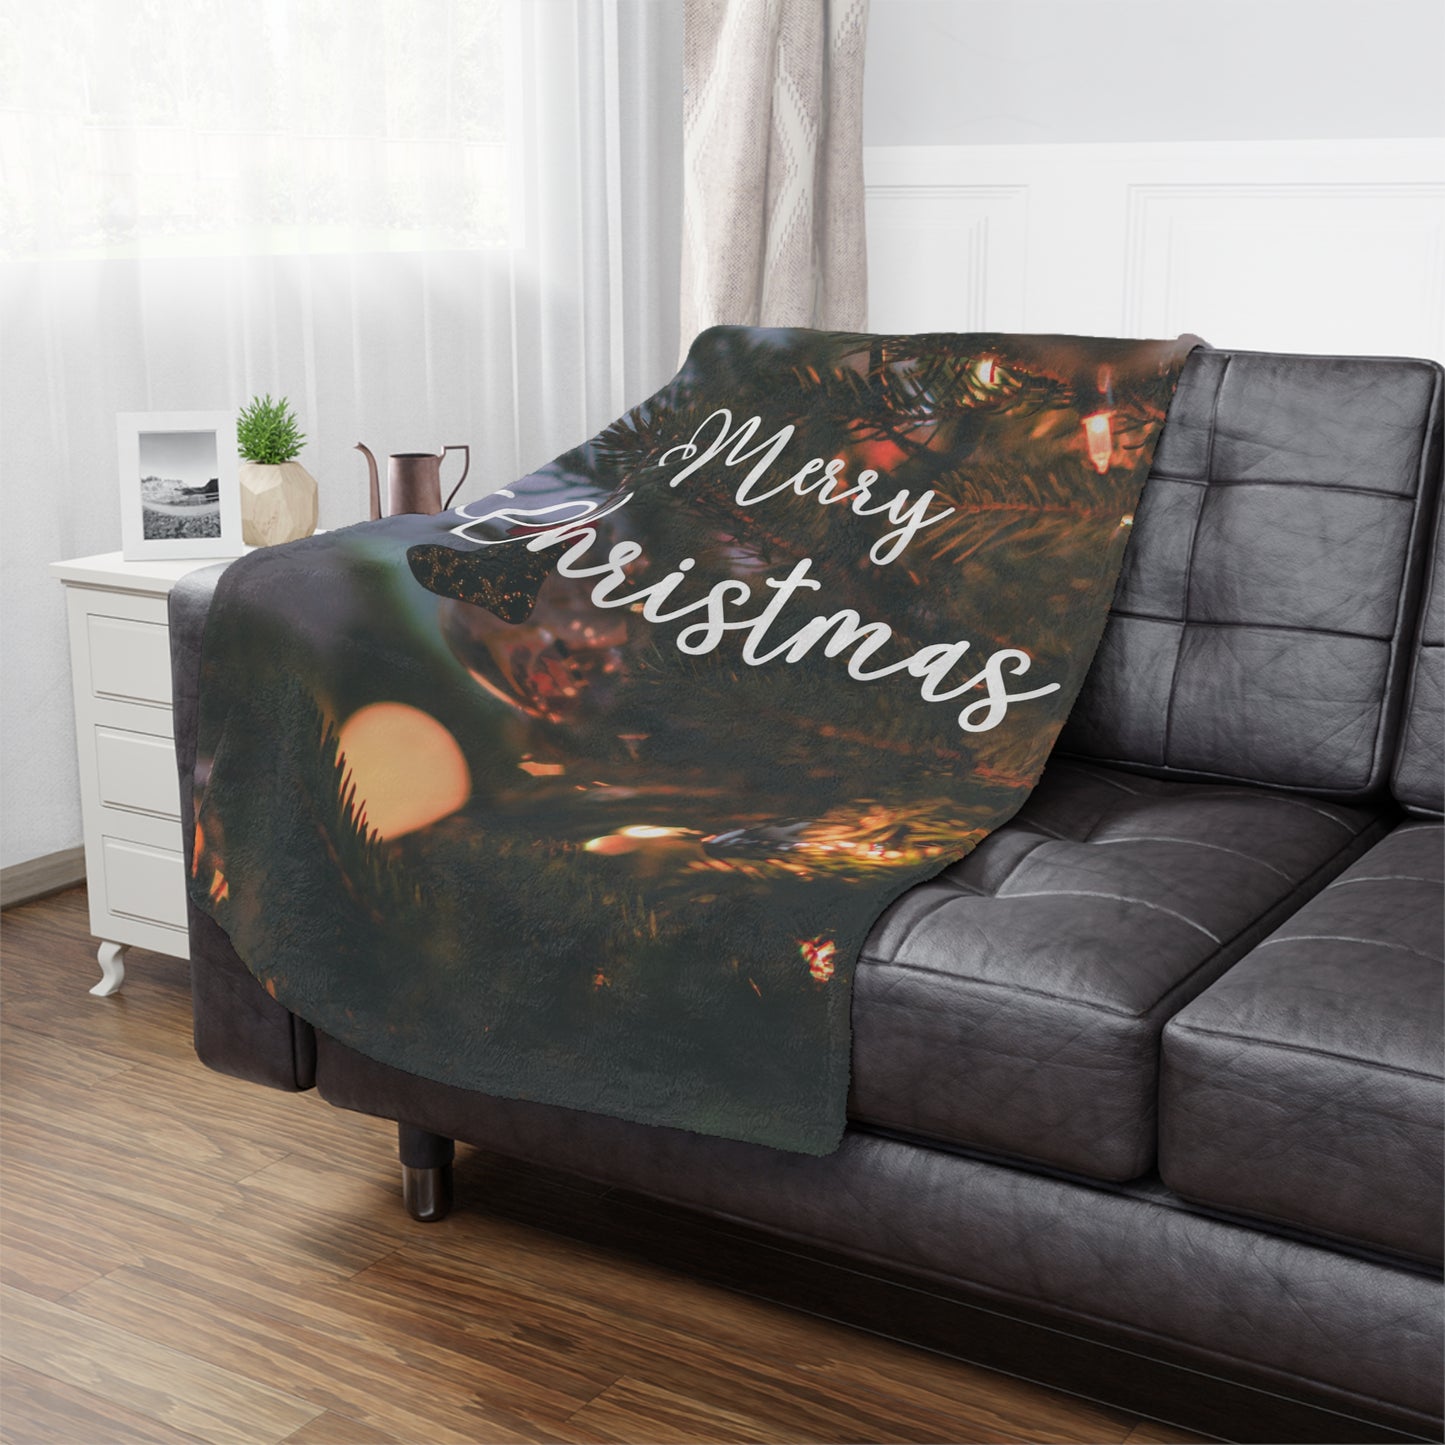 Merry Christmas with Ornament Printed Minky Blanket